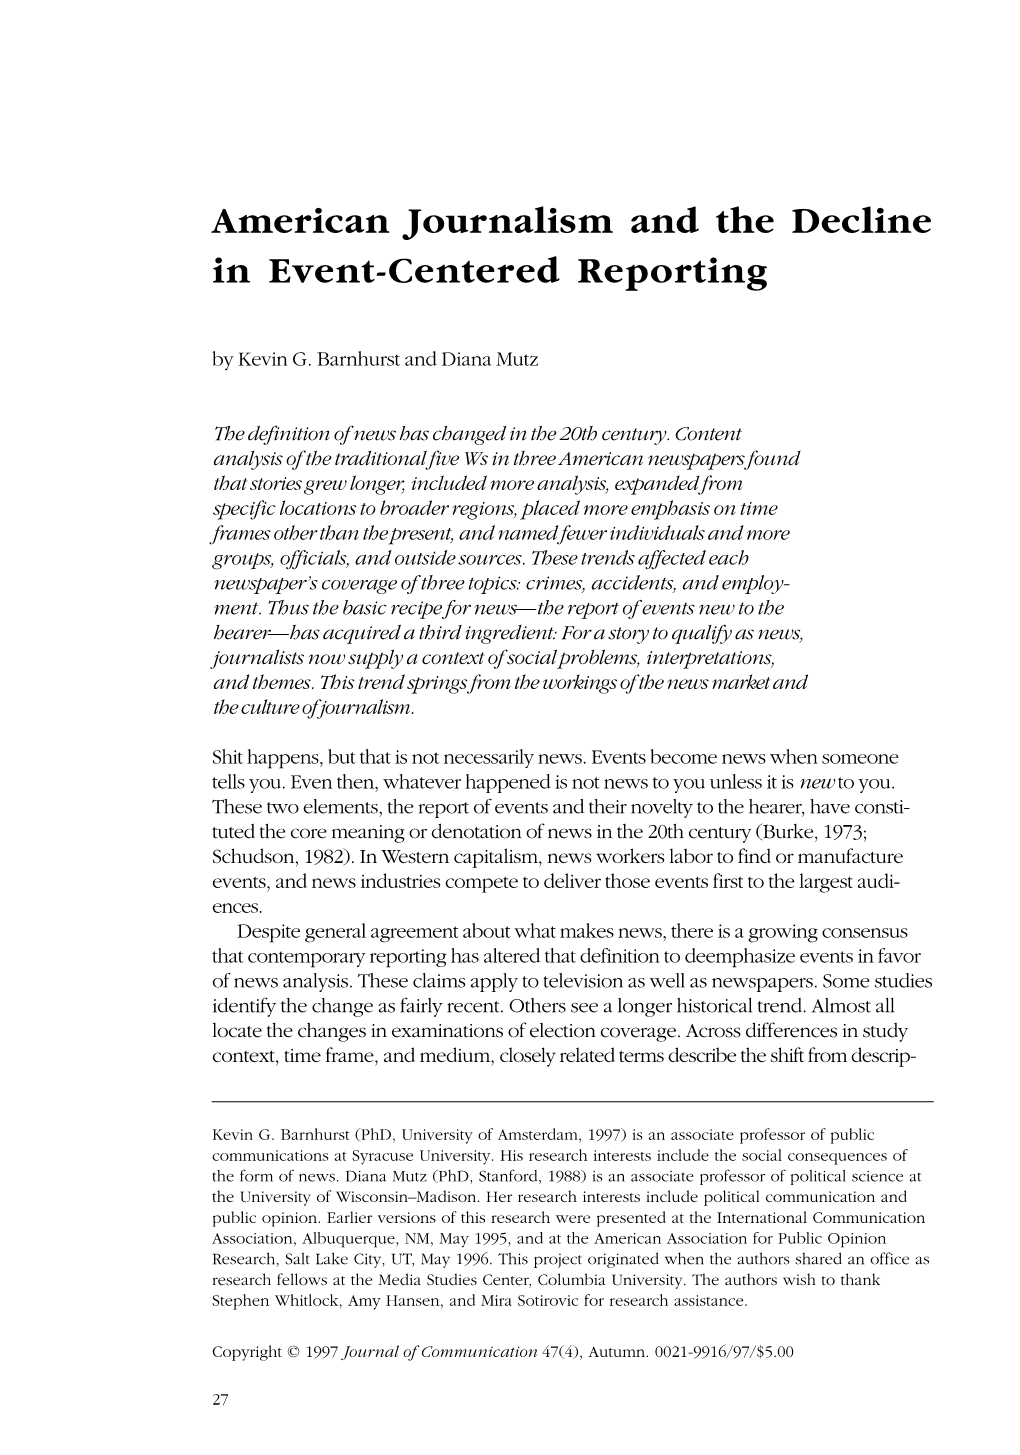 American Journalism and the Decline in Event-Centered Reporting by Kevin G